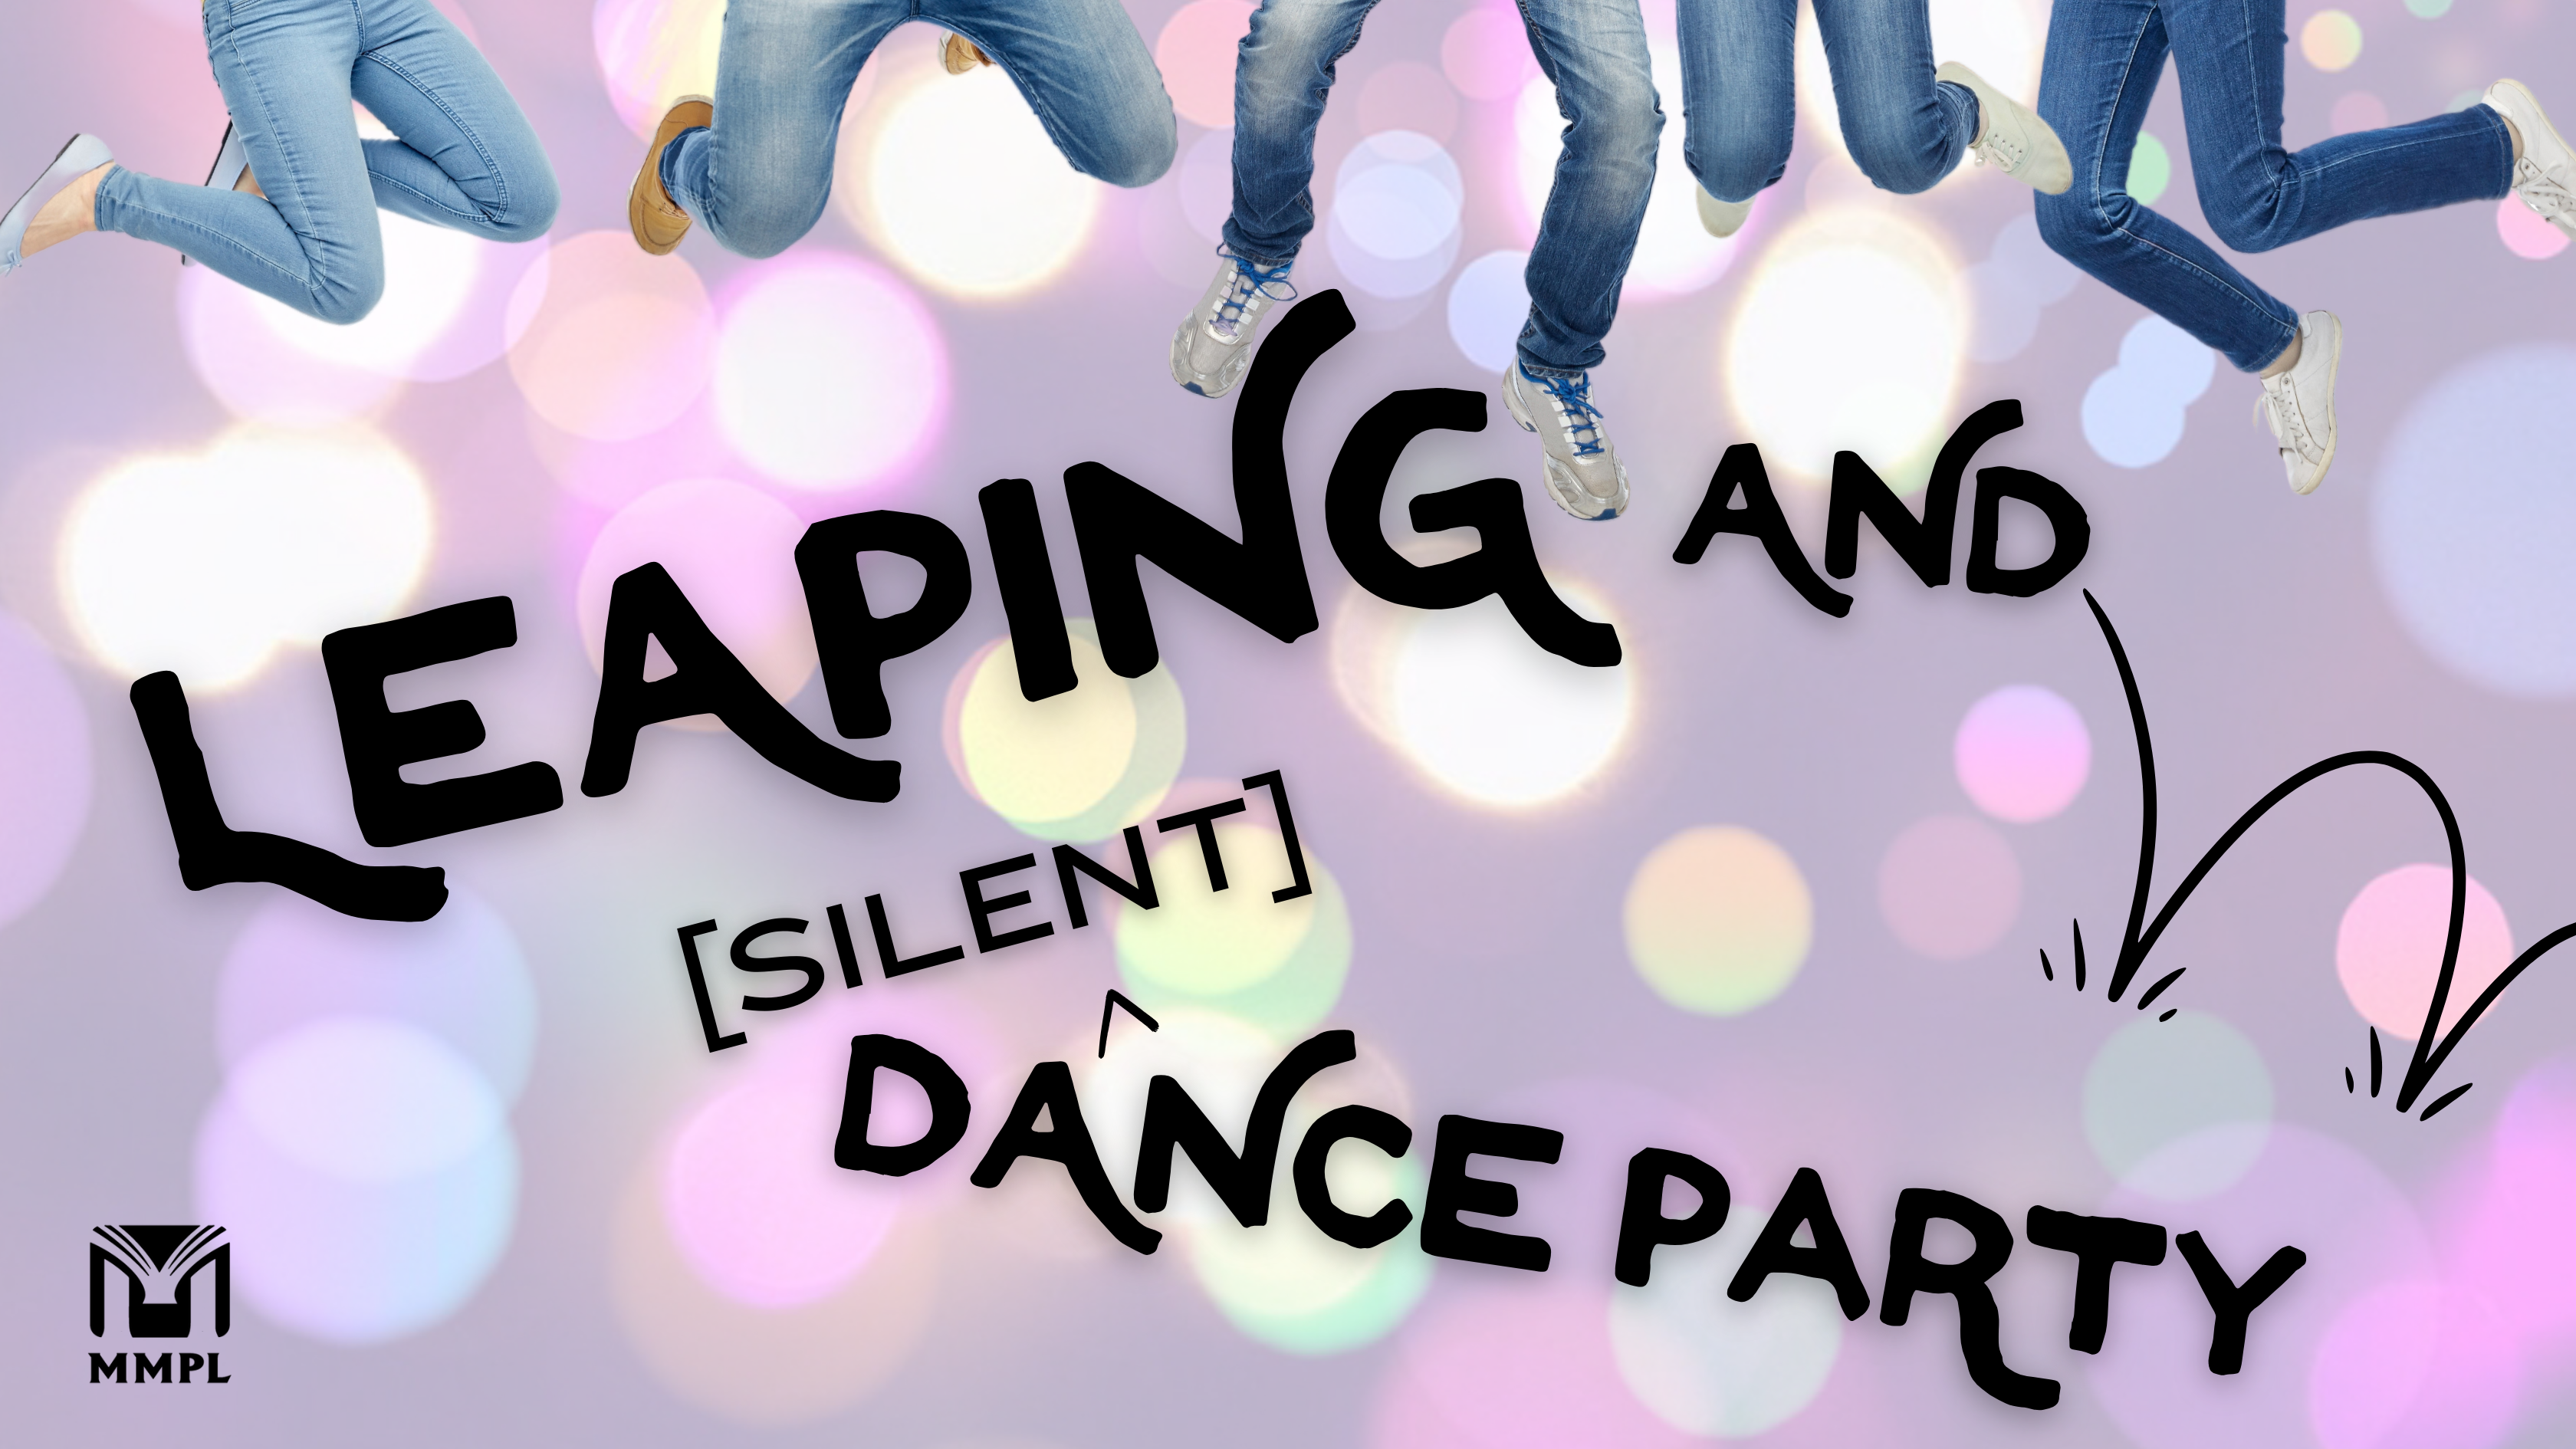 Leaping and [Silent] Dance Party